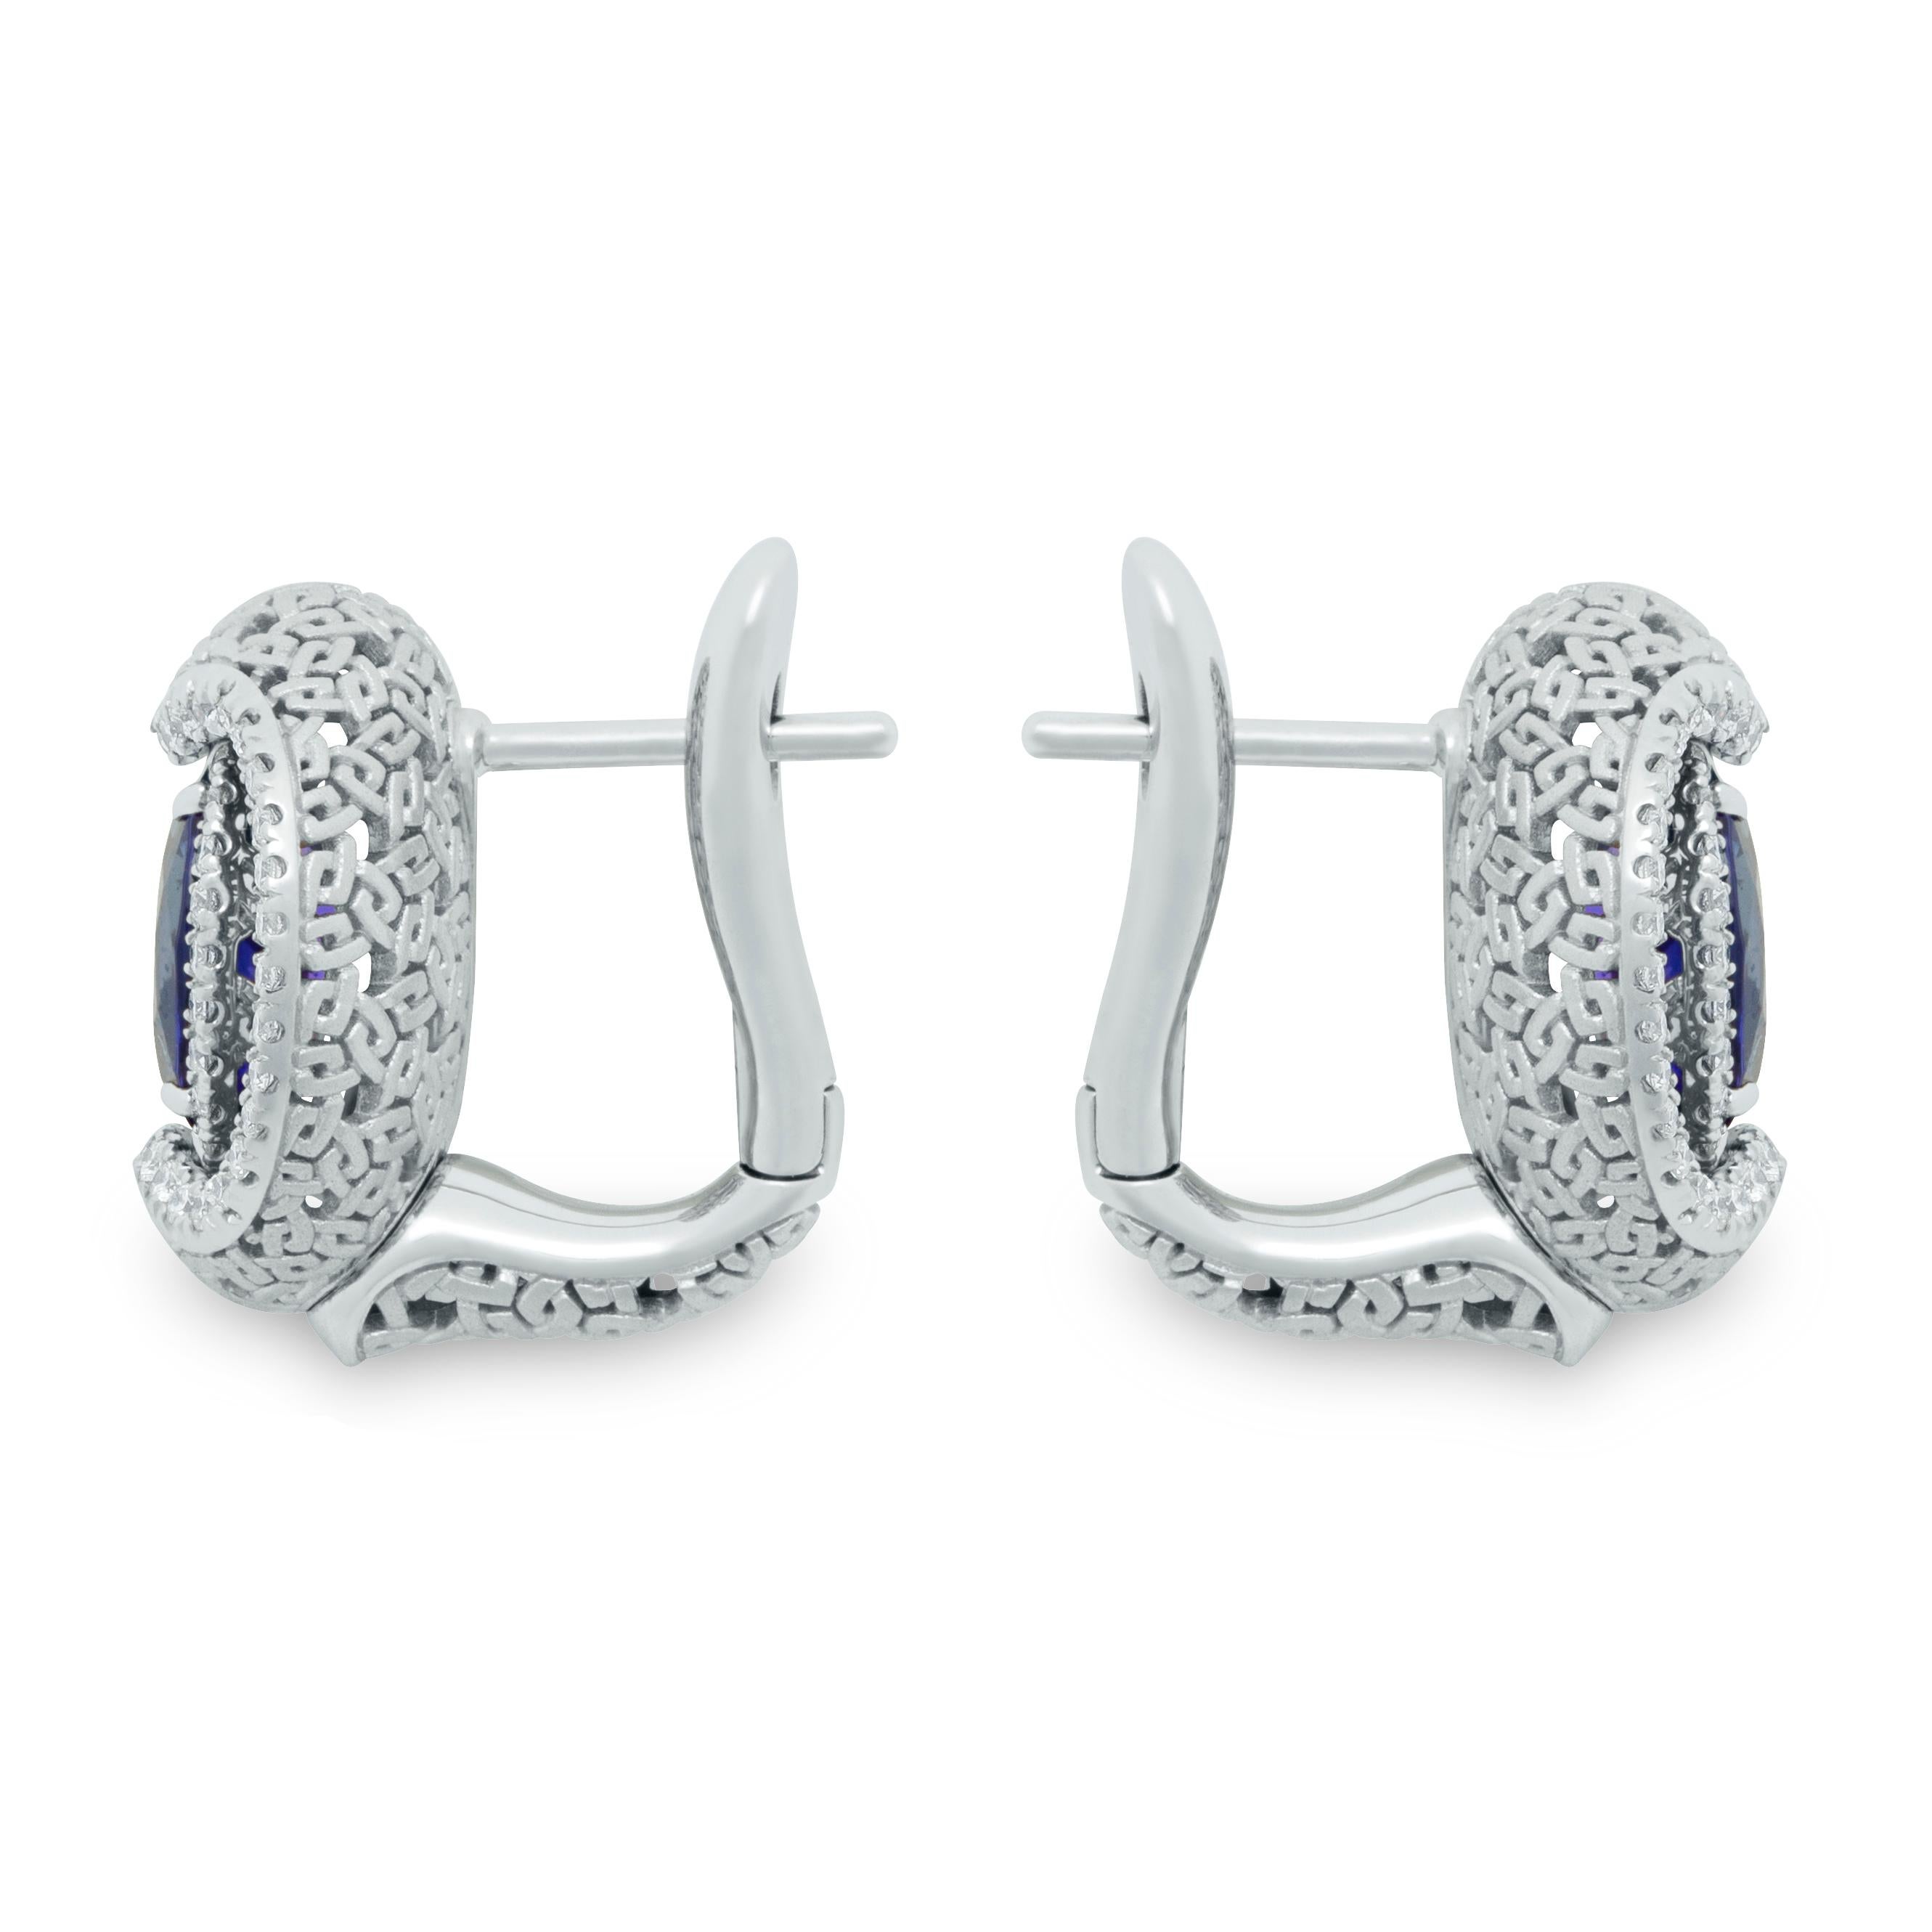 Tanzanite 2.61 Carat Diamonds 18 Karat White Gold New Classic Earrings
Introducing Earrings crafted from delicate 18 Karat White Gold, which in company with two 2.61 Carat Tanzanites and 116 Diamonds around it, creates a truly noble look. But the